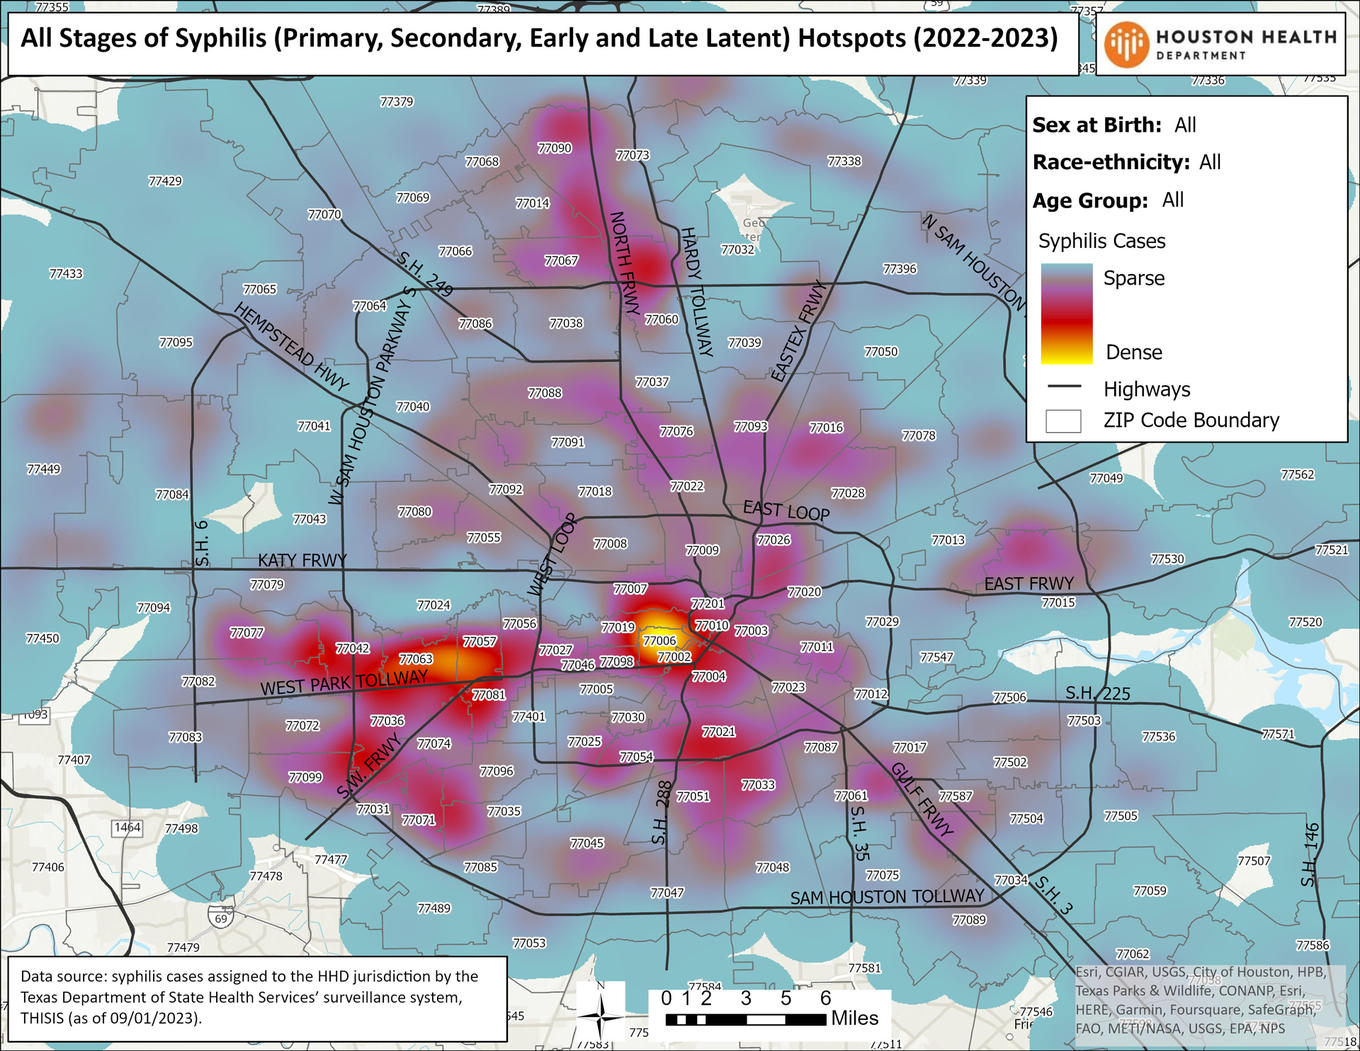 All stages of syphilis (primary, secondary, early and late latent) hotspots (2022-2023). Sex at birth: all